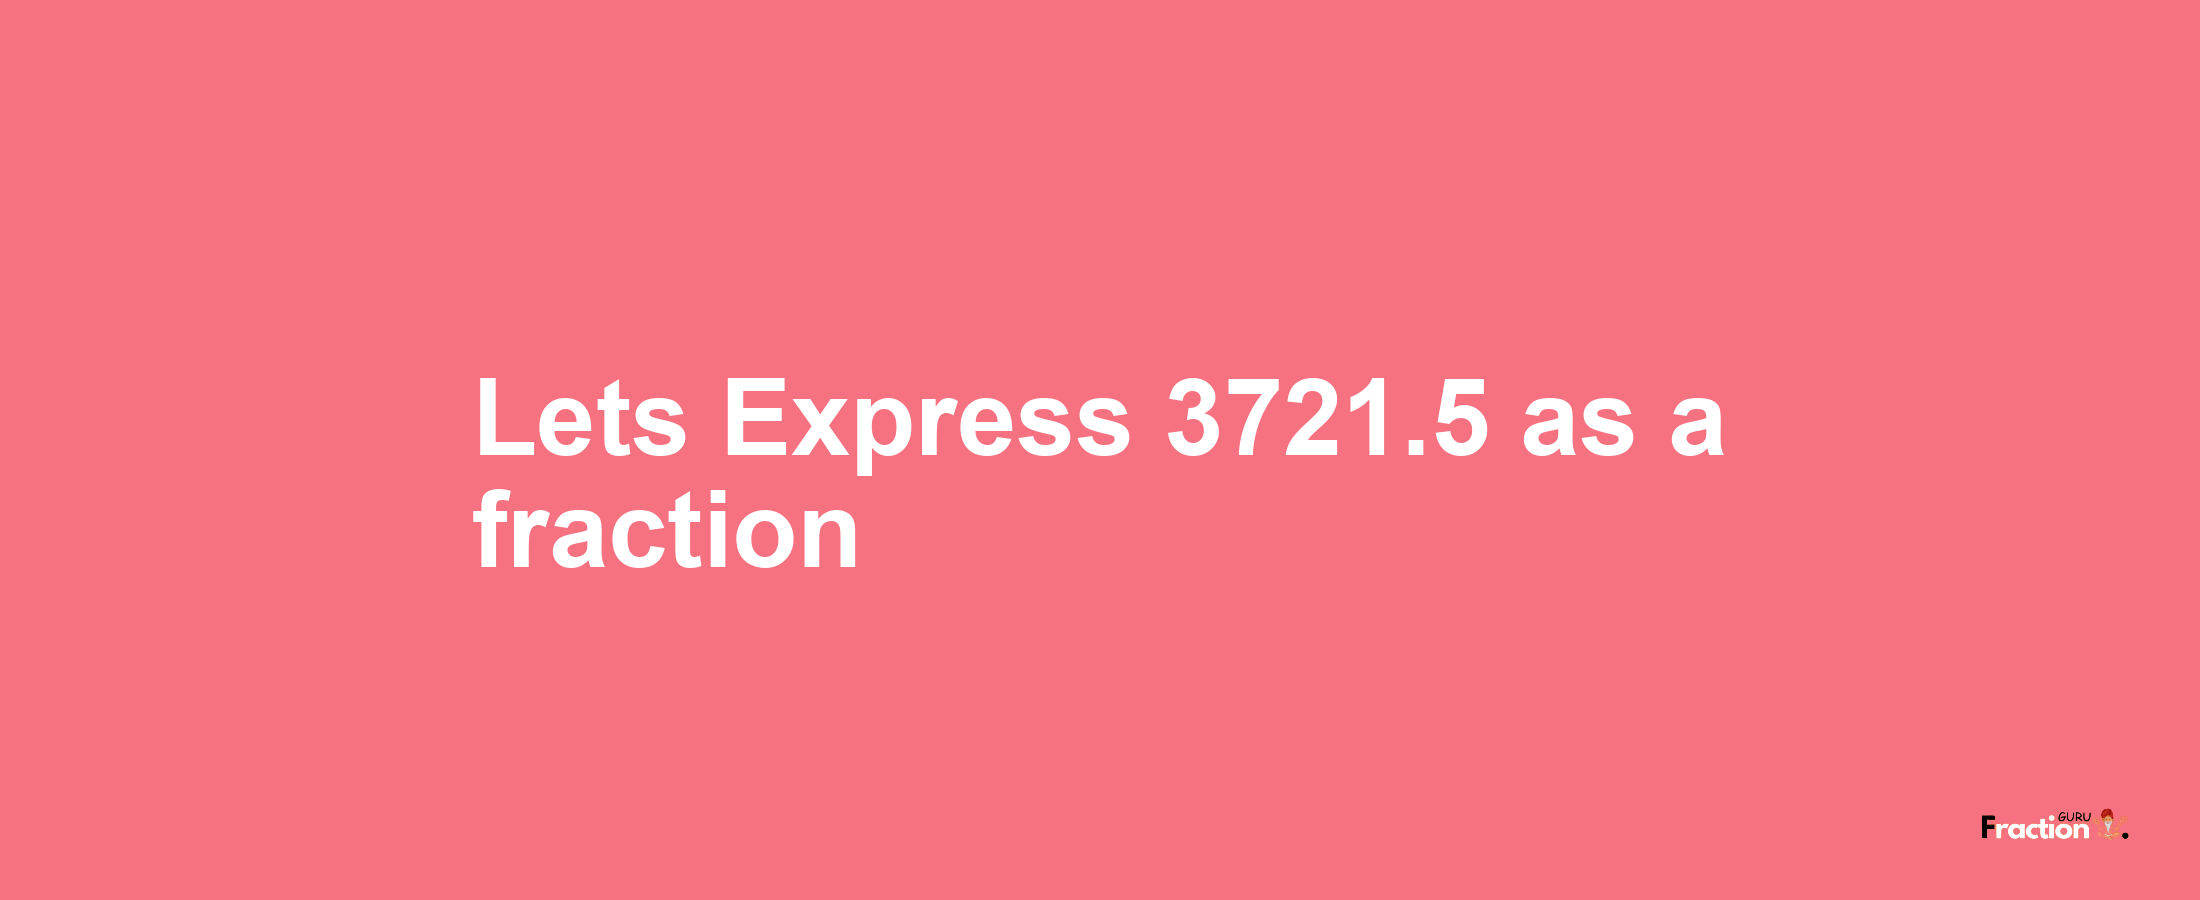 Lets Express 3721.5 as afraction